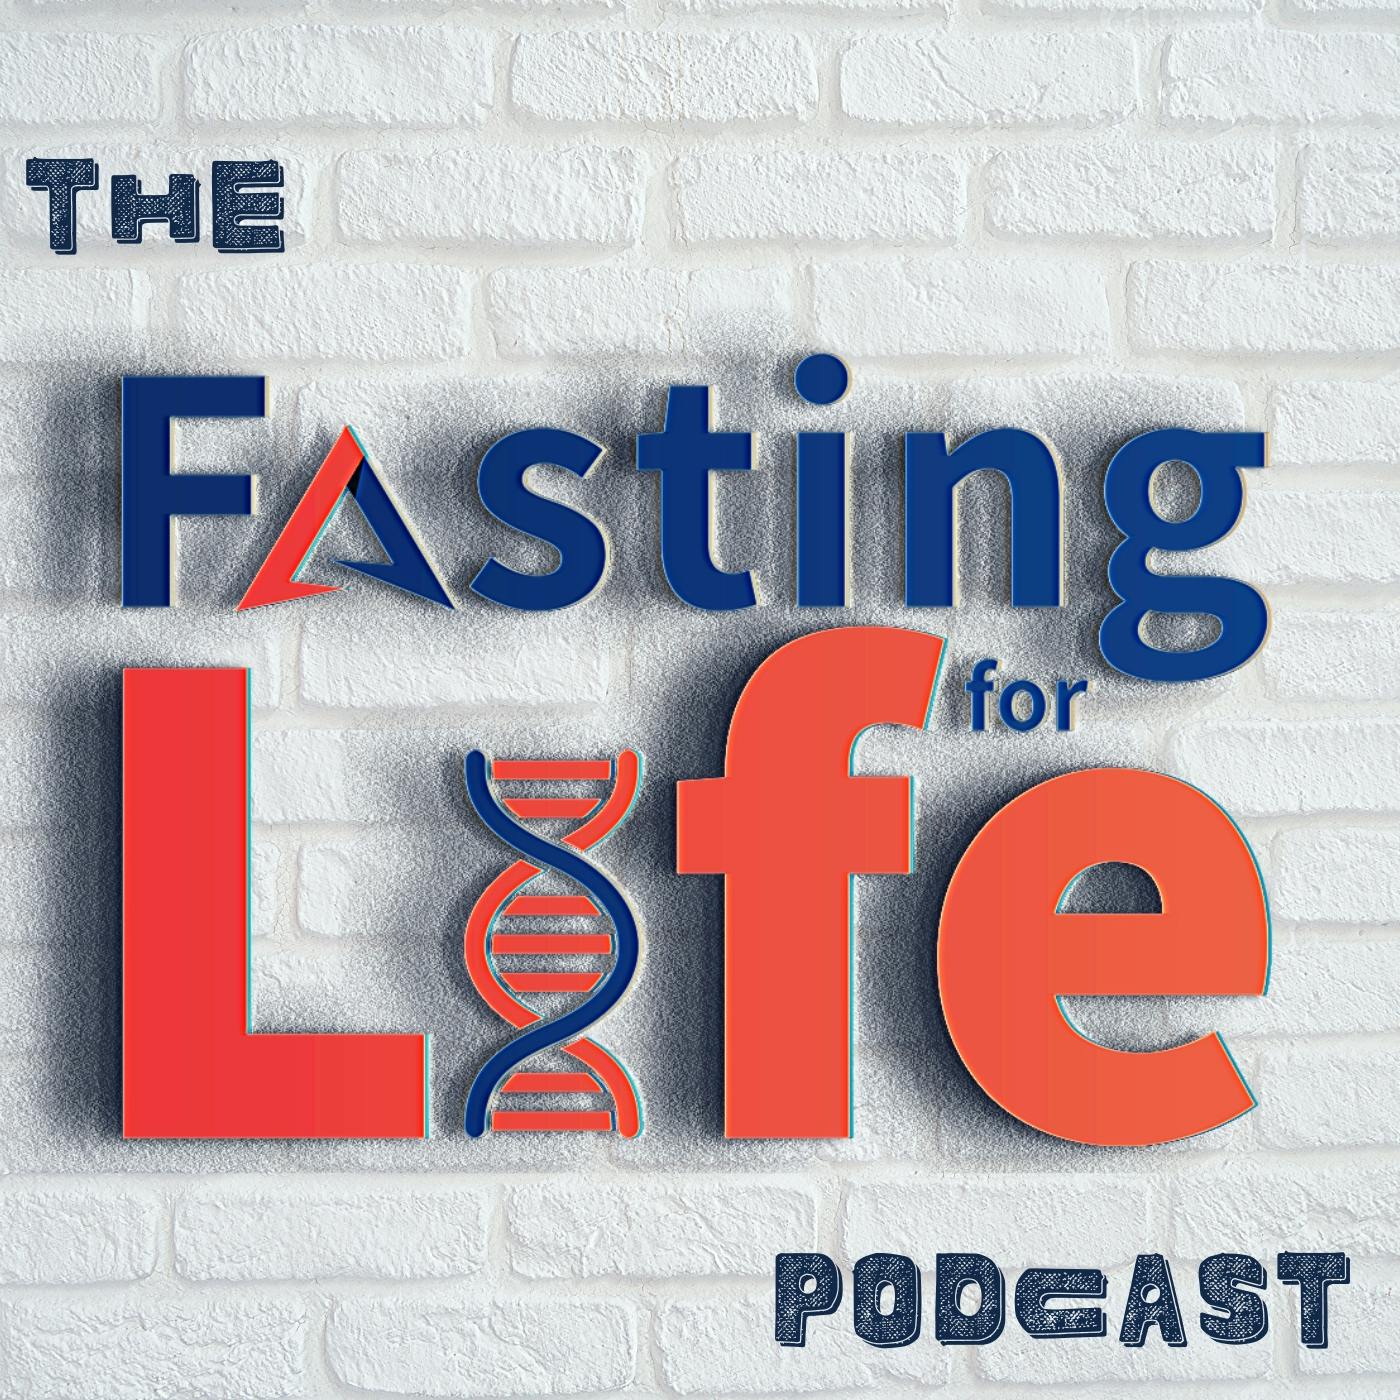 Ep. 184 - Fasting habit ladders to level-up your lifestyle | Using non-food rewards to rewire bad diet habits | Why patience is your superpower & how to increase it today | How to get more consistent 